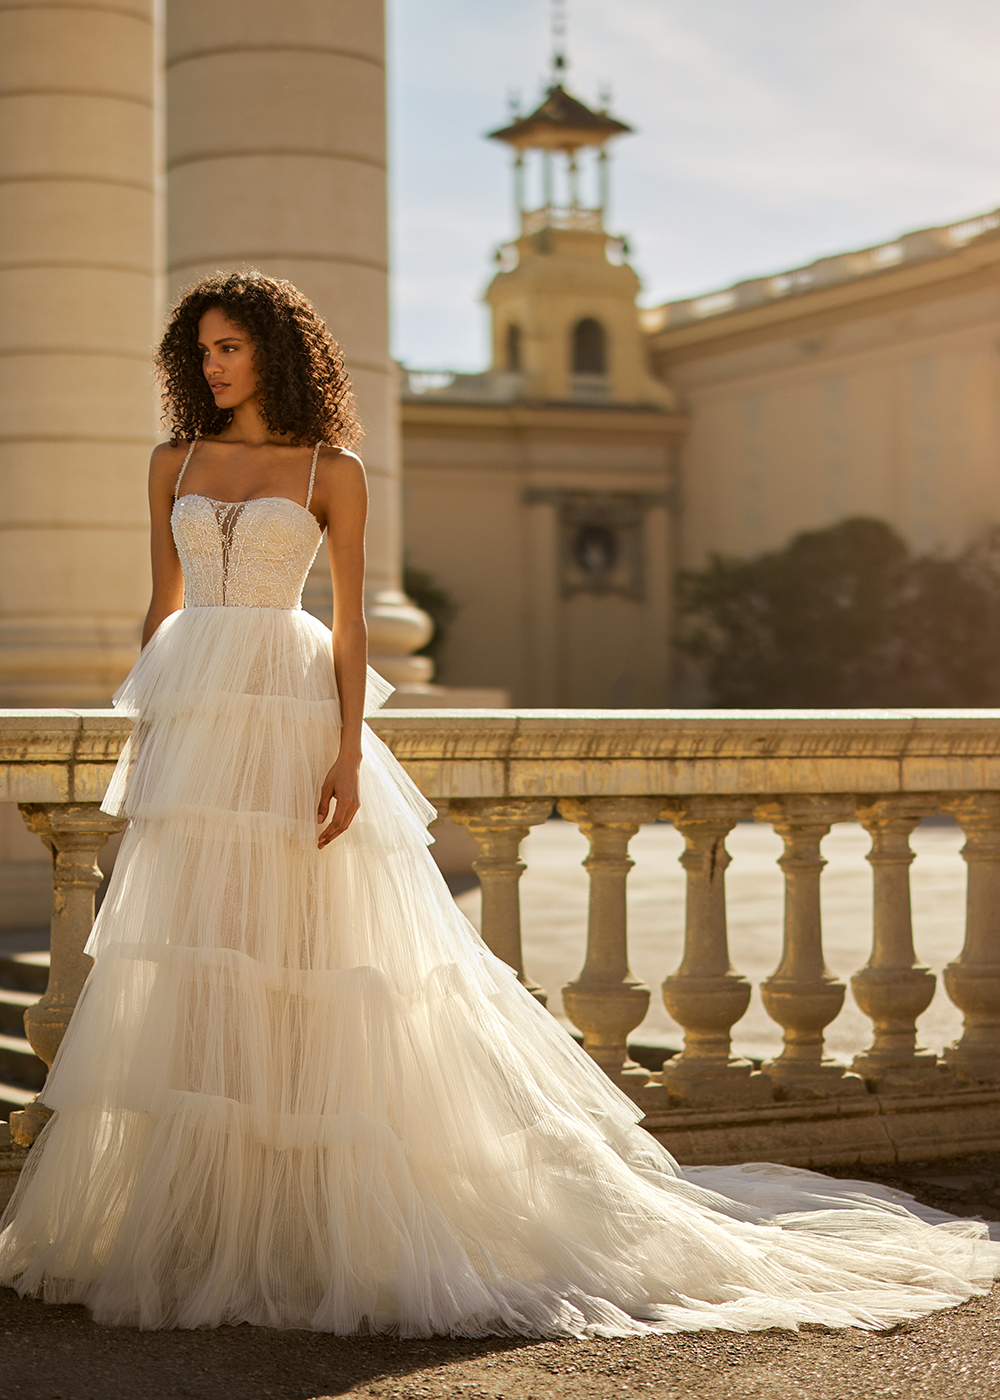 Halter Ruched Wedding Dress from Camille La Vie and Group USA